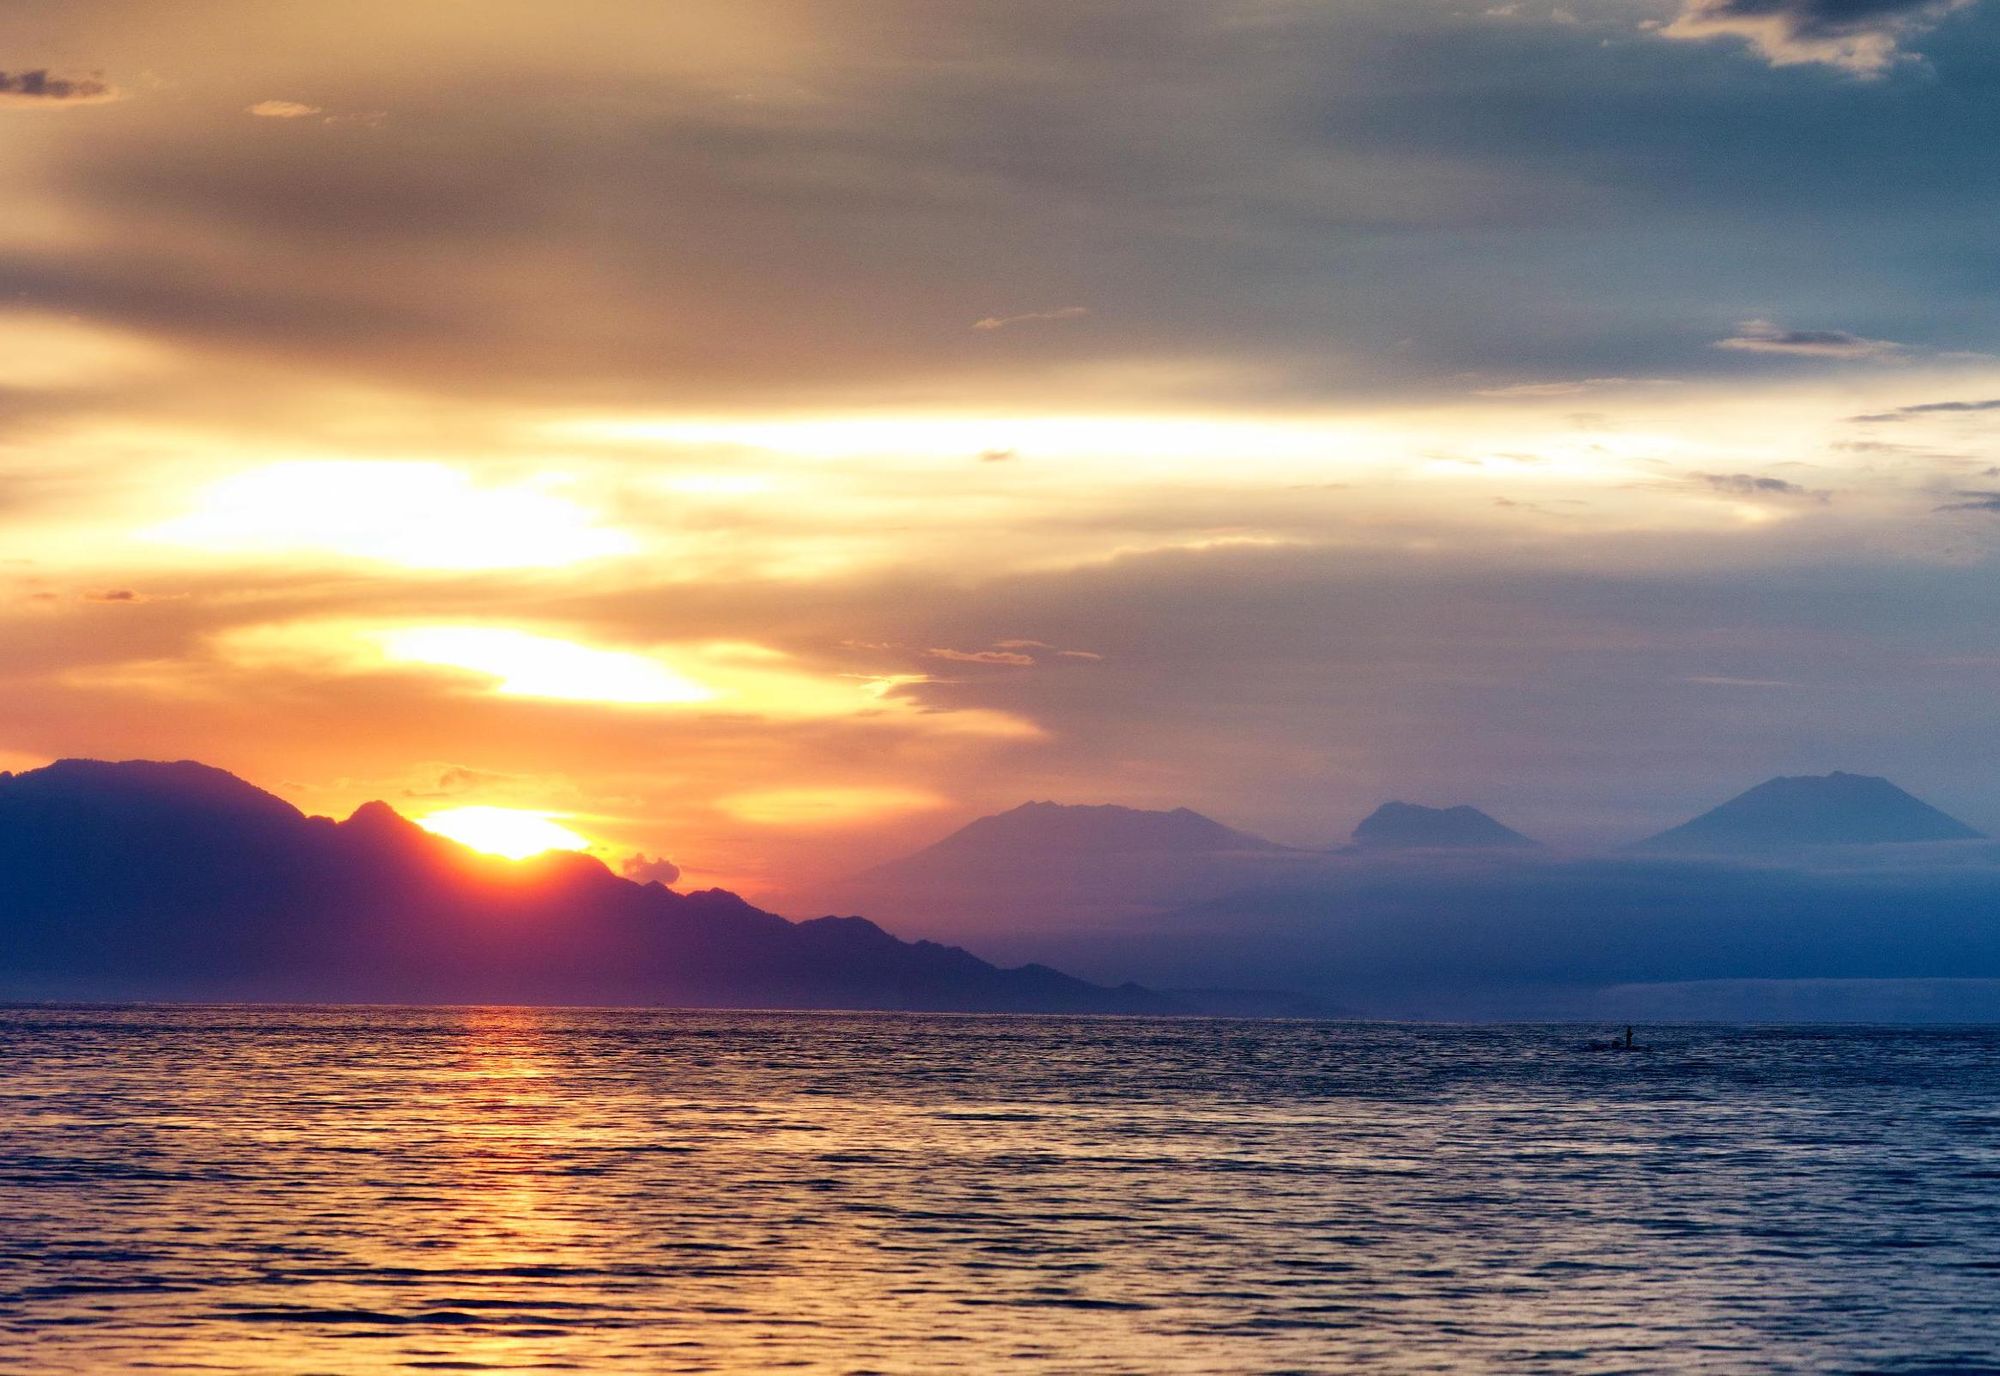 The sunset, viewed from the north coast of Bali. Photo: Getty